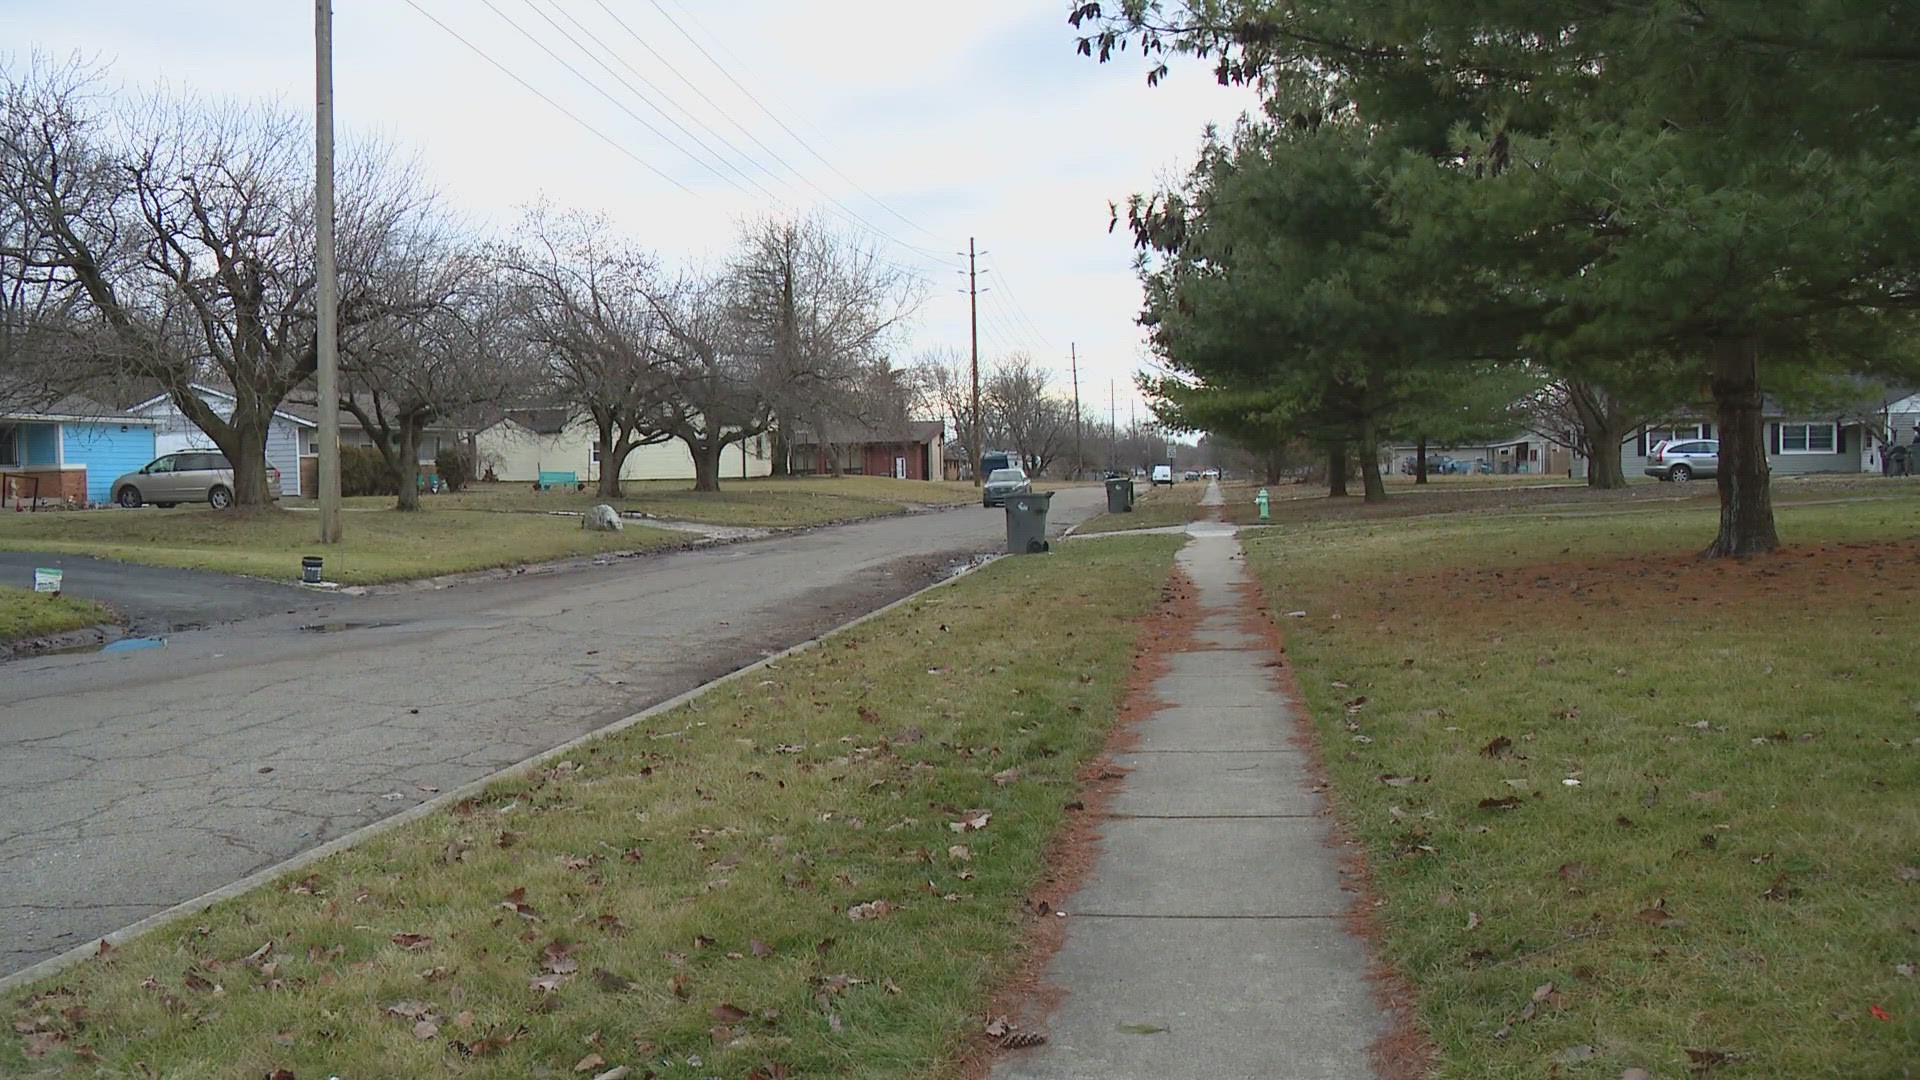 The 64-year-old man was attacked by two dogs near 21st & Kitley.